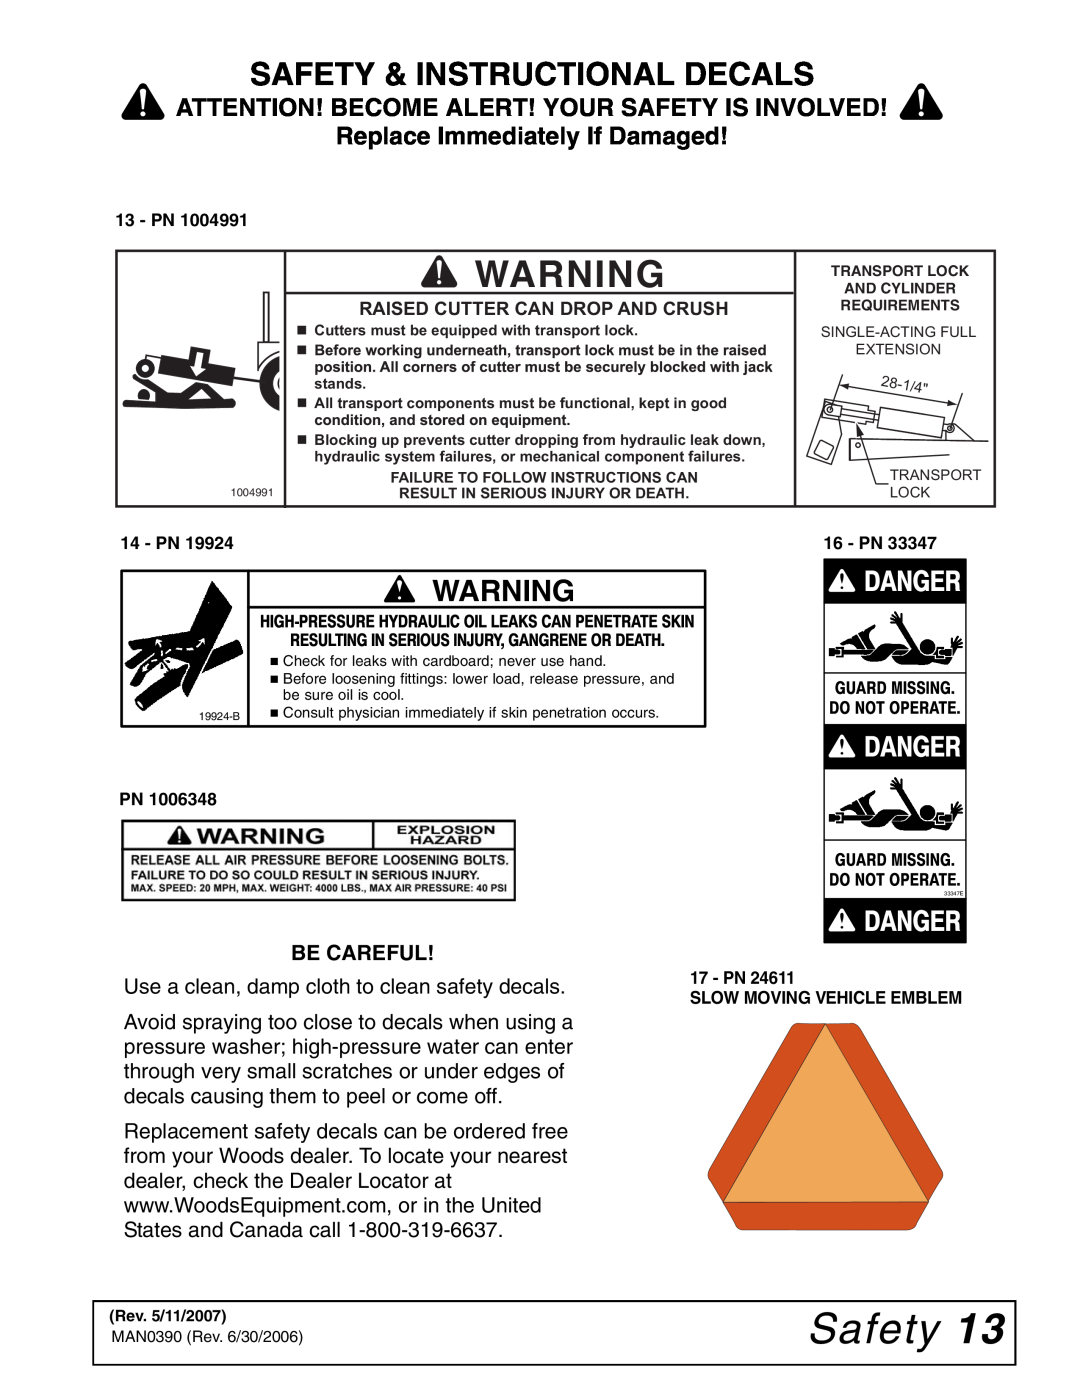 Woods Equipment DS120 33347E, Safety & Instructional Decals, Attention! Become Alert! Your Safety Is Involved, 1004991 